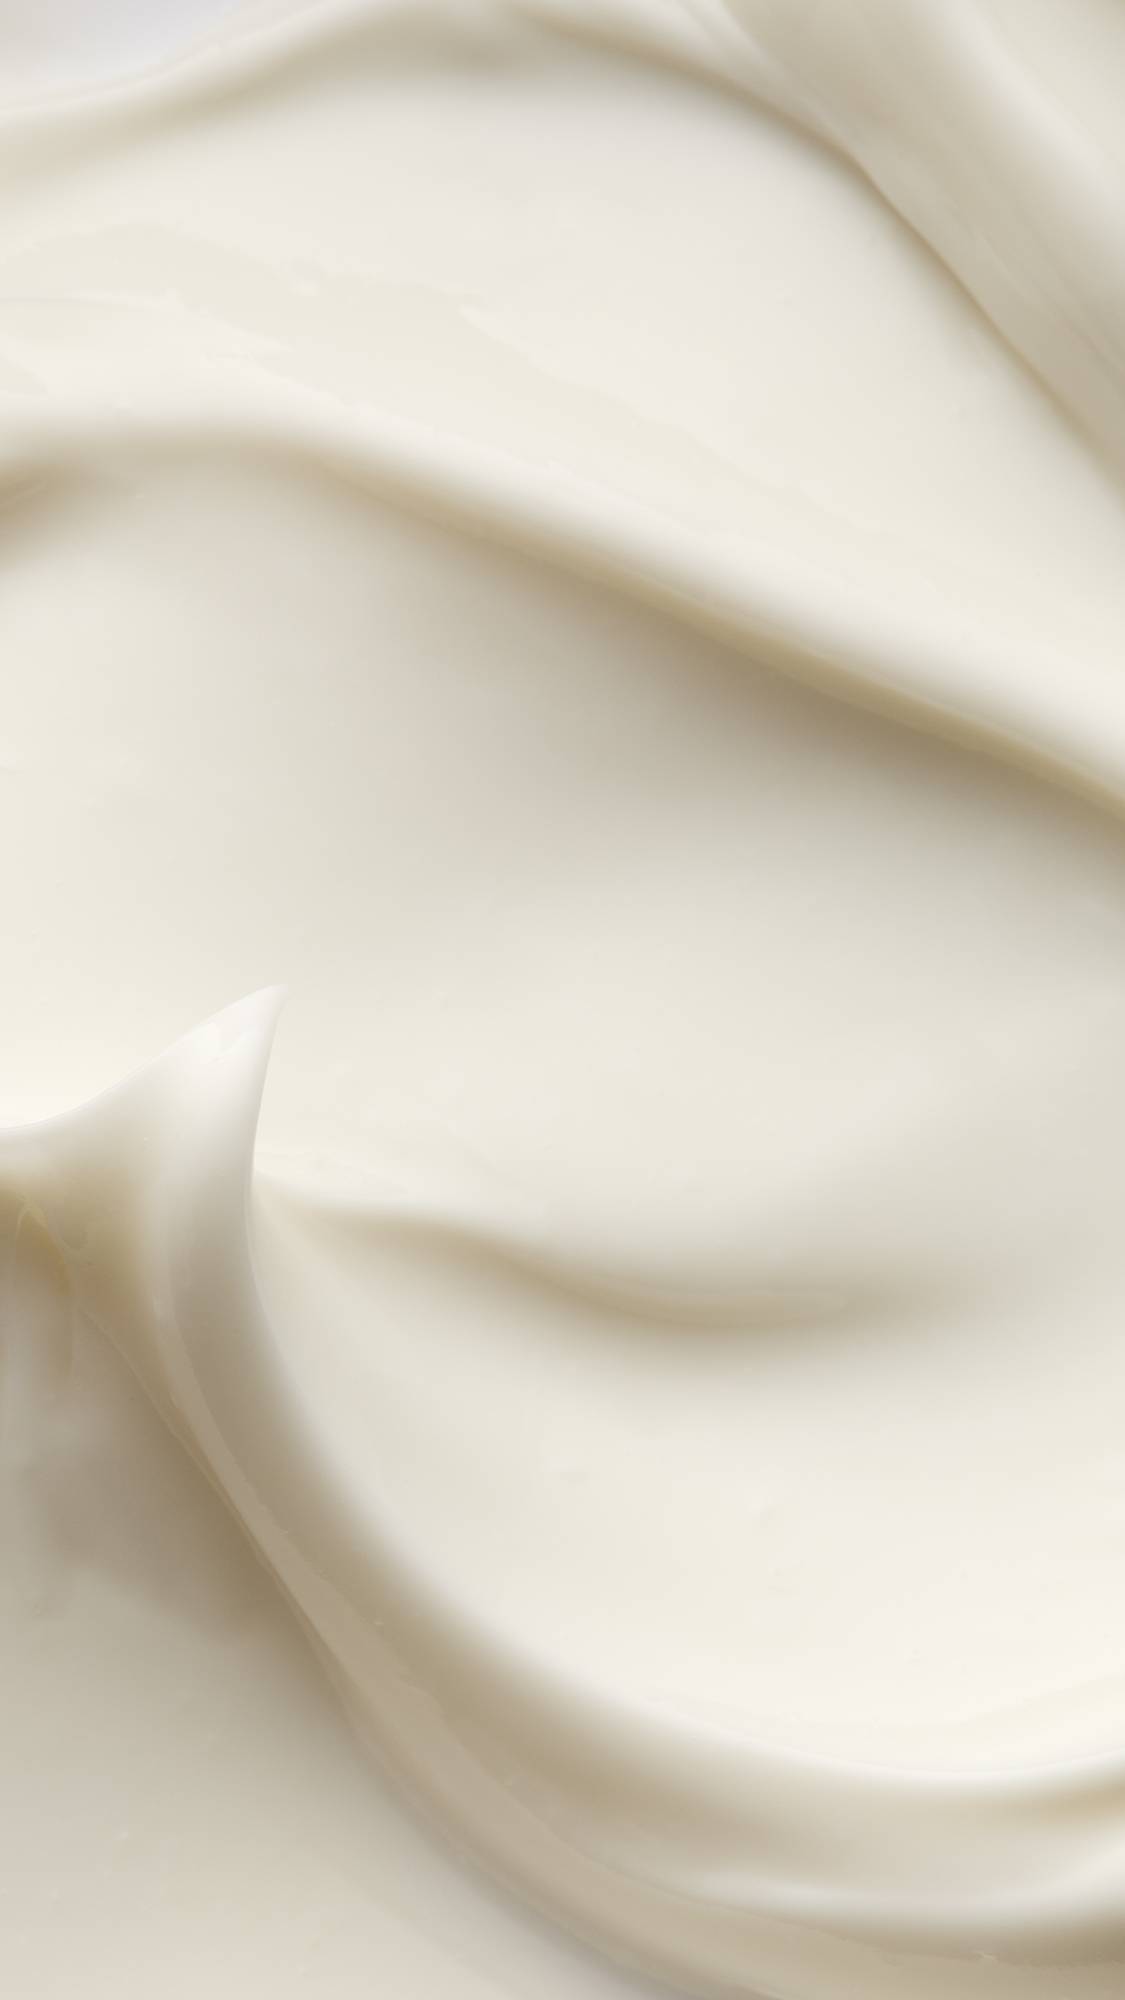 A super close-up of the Celestial self-preserving moisturiser focusing on the almost velvety, fabric-like waves of creamy, satin, lotion.